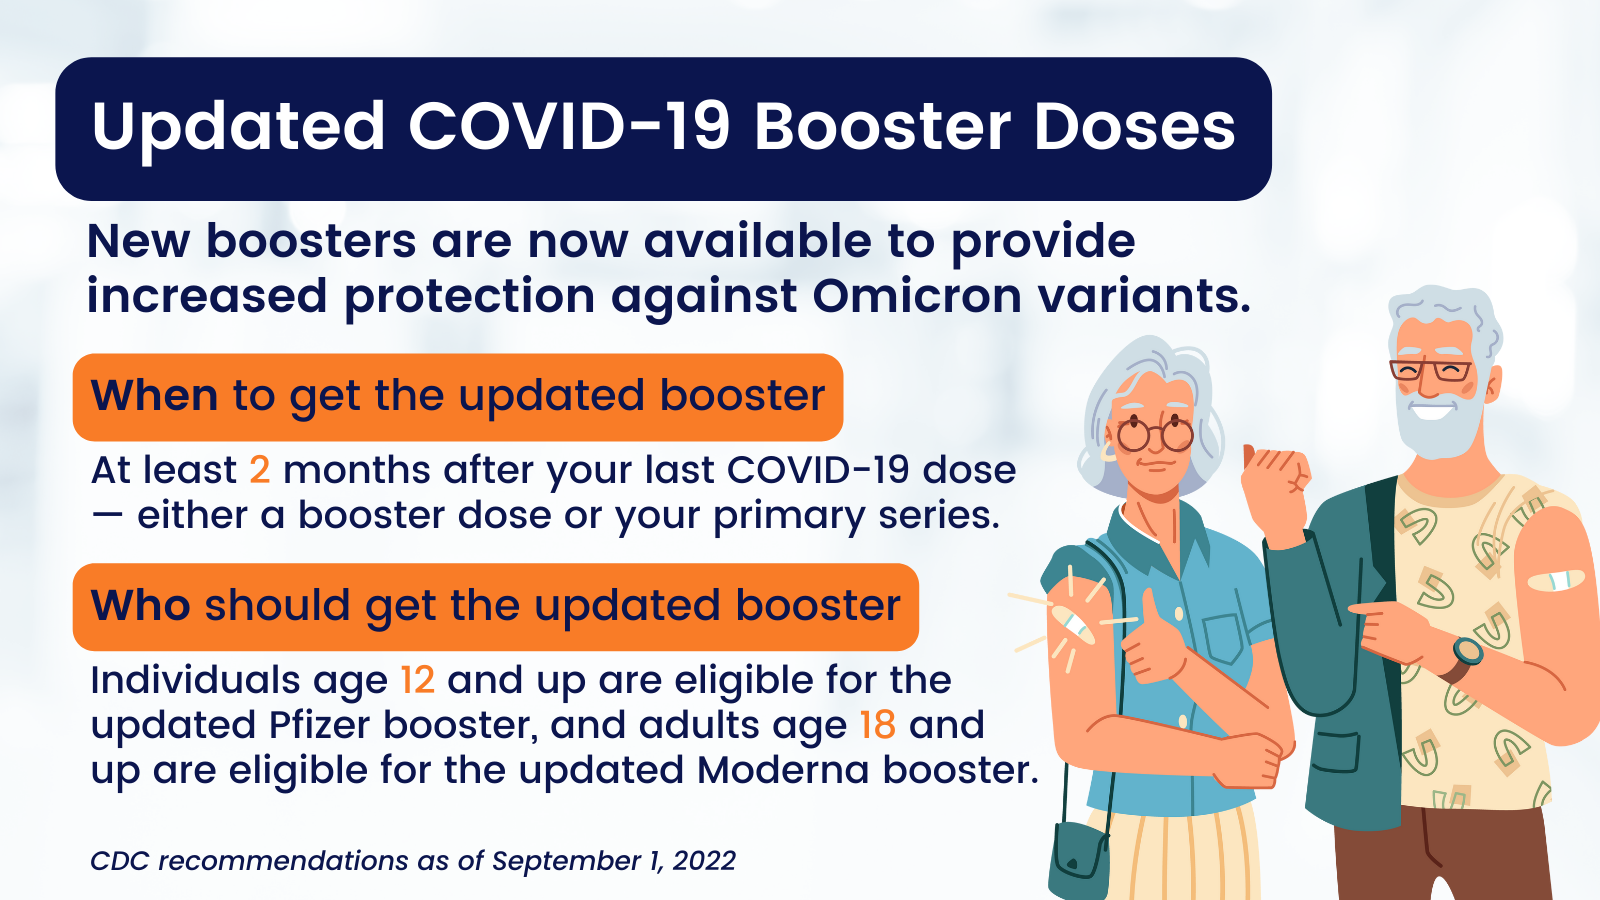 Twitter size image with white background and navy, orange and white text communicates information about updated COVID-19 booster doses. CDC recommendations as of 09/01/2022 is in the bottom left corner. White older male and female with white and gray hair are smiling and pointing to a band aid on on their upper arm where they received their booster.